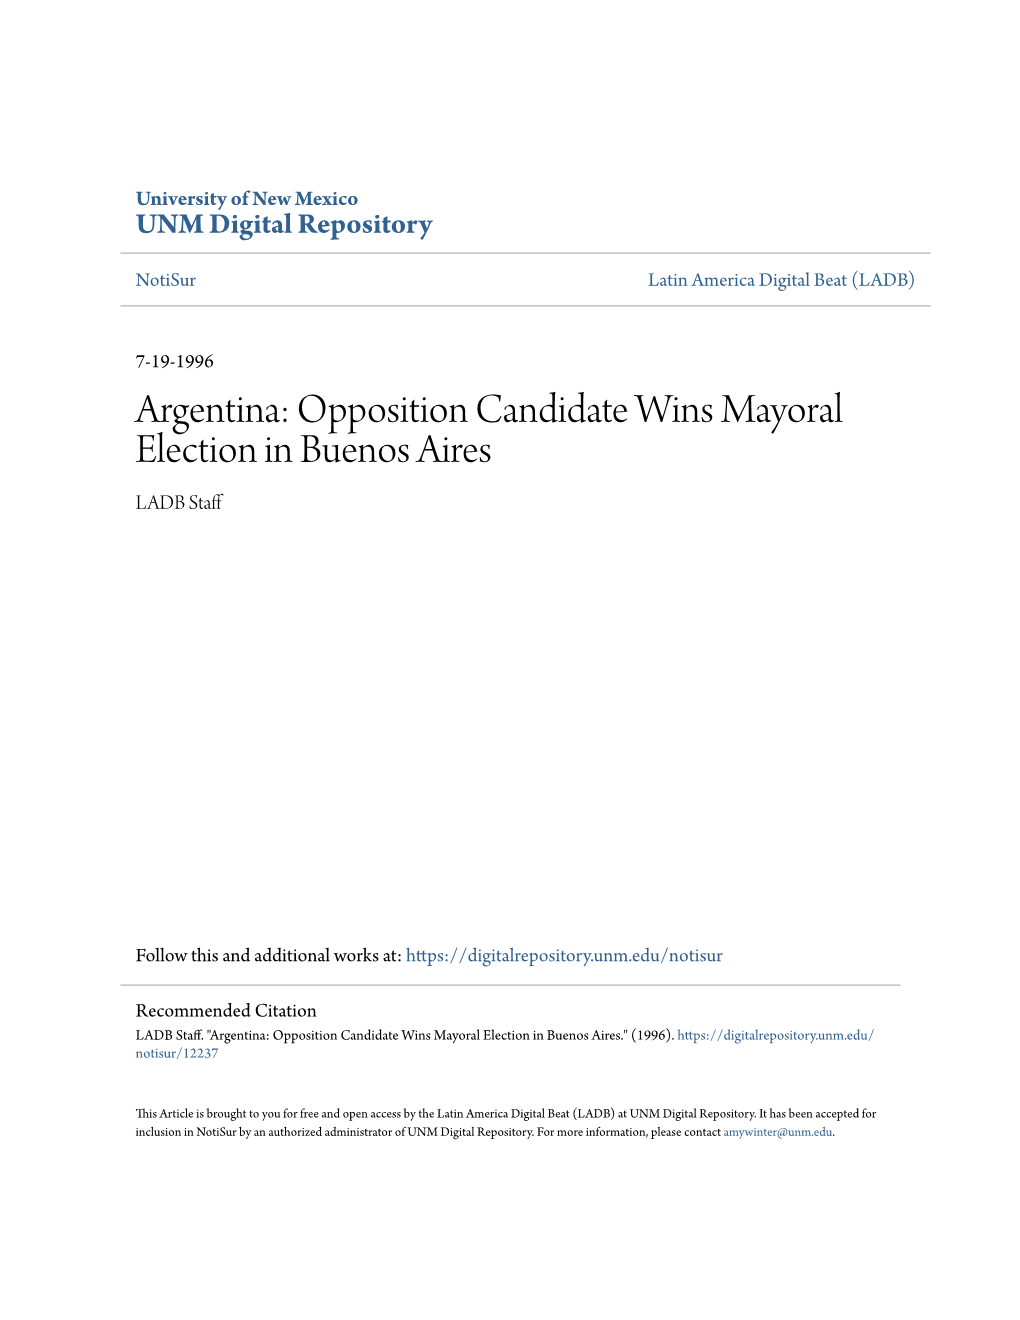 Opposition Candidate Wins Mayoral Election in Buenos Aires LADB Staff